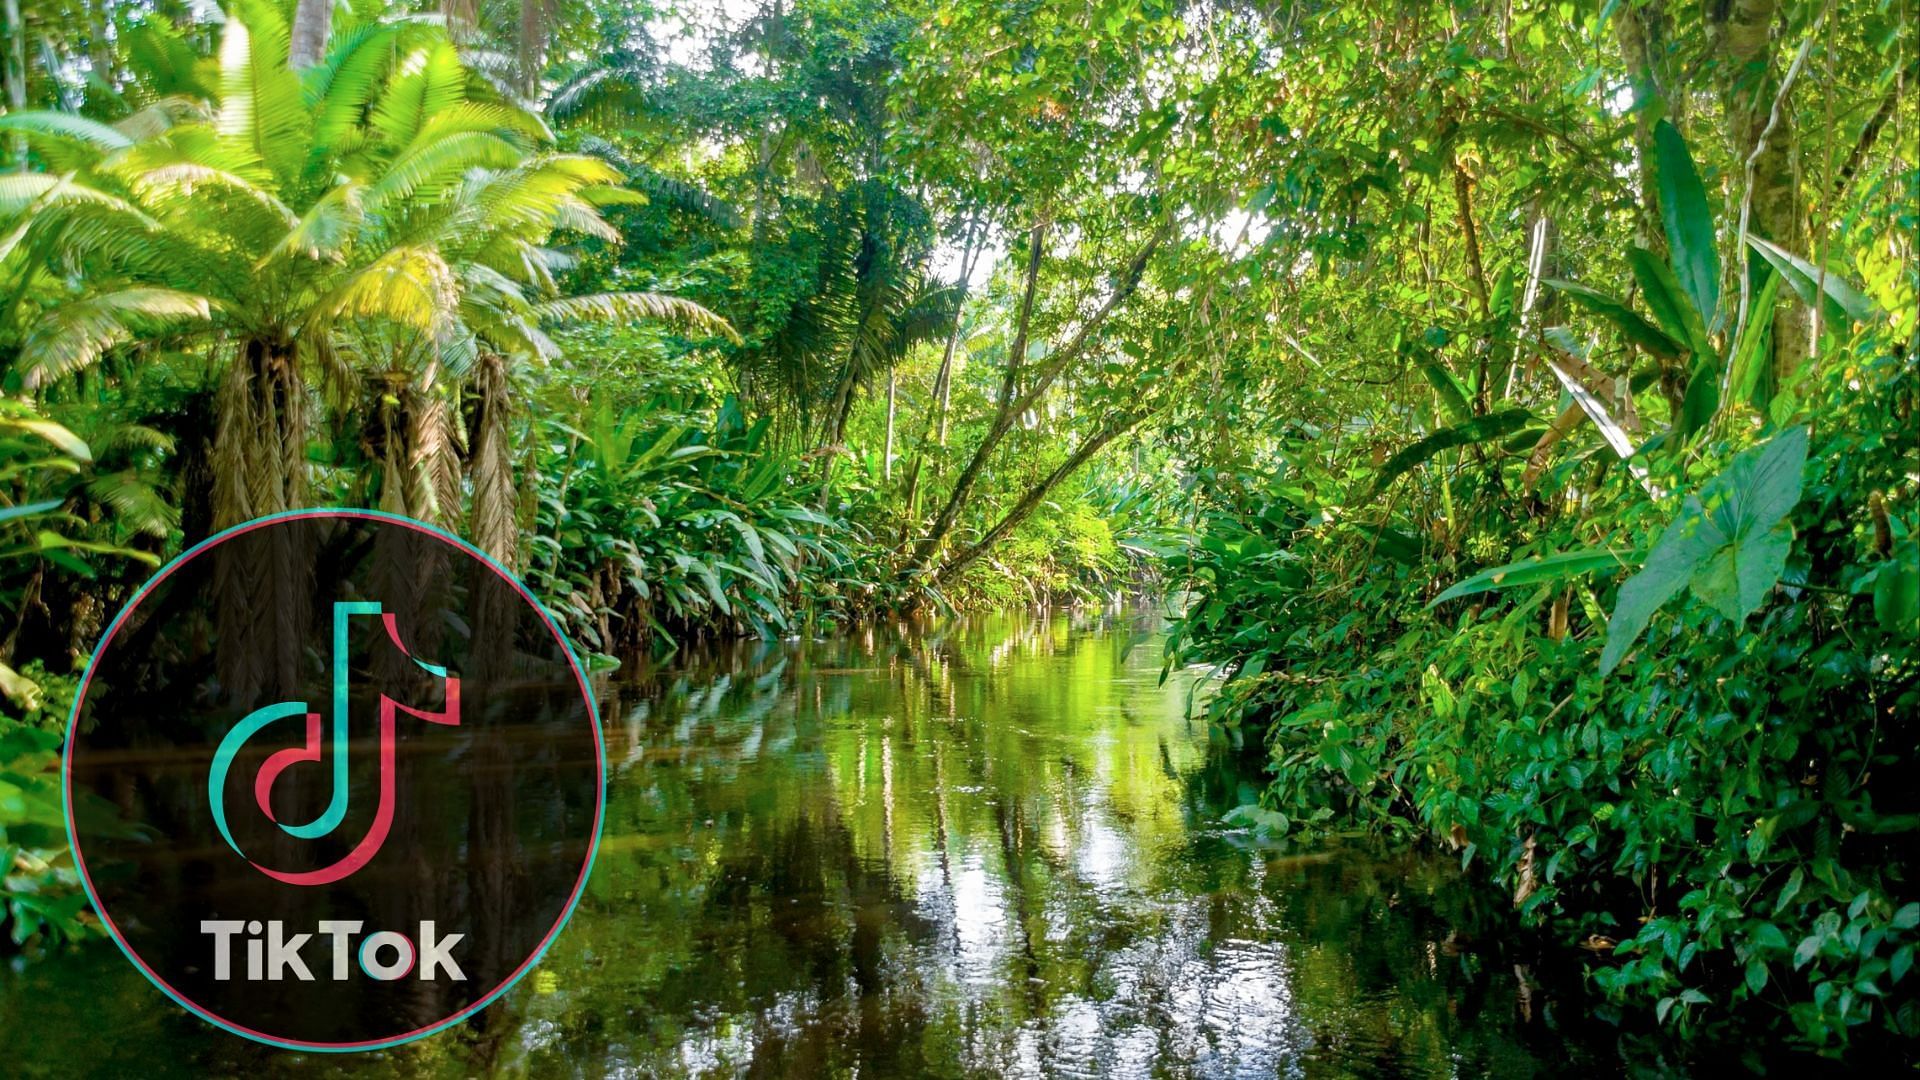 Rainforest personality test takes TikTok by a storm (image via Getty Images)